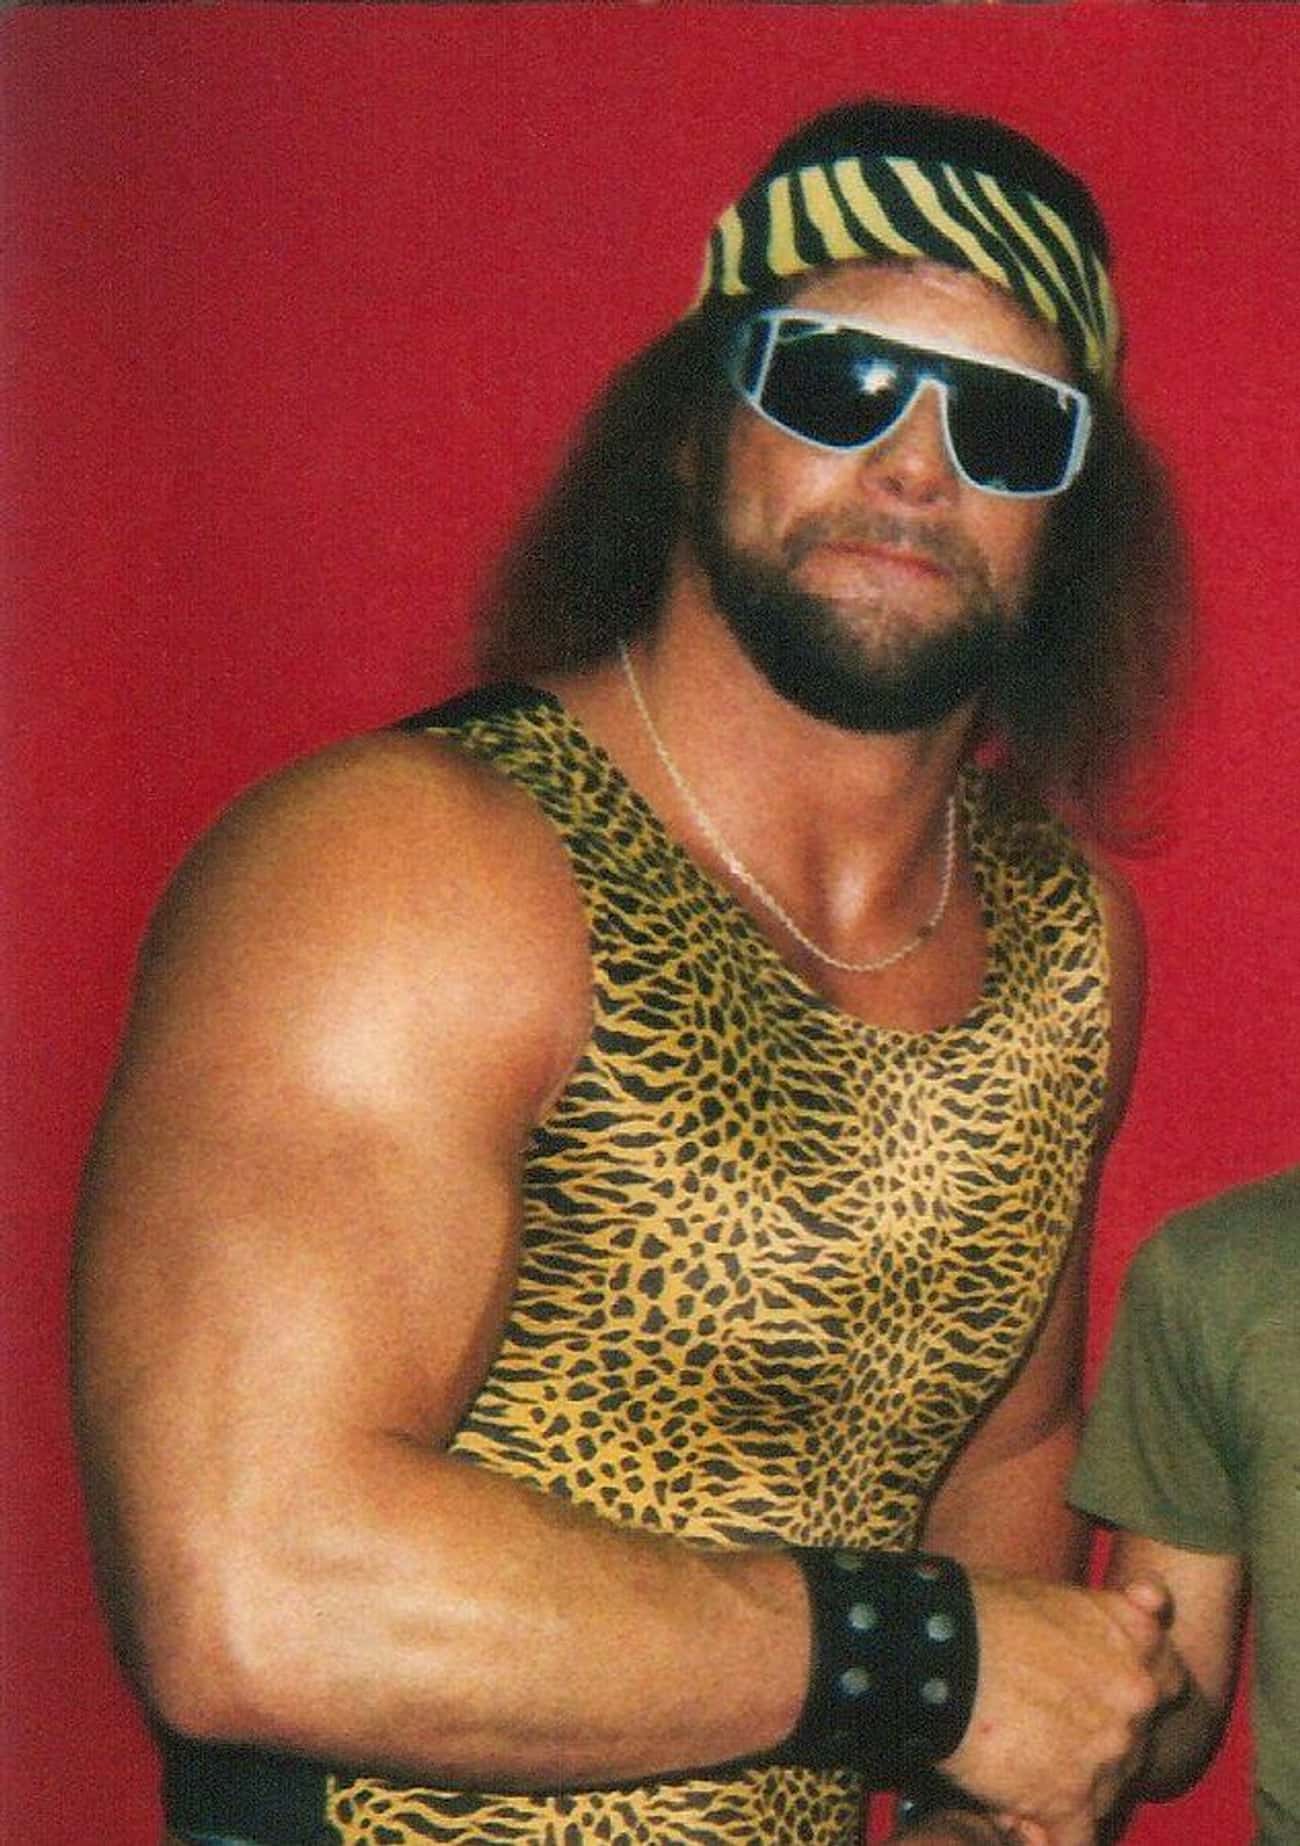 Jake The Snake’s Cobra Bit Randy Savage And Put Him In The Hospital